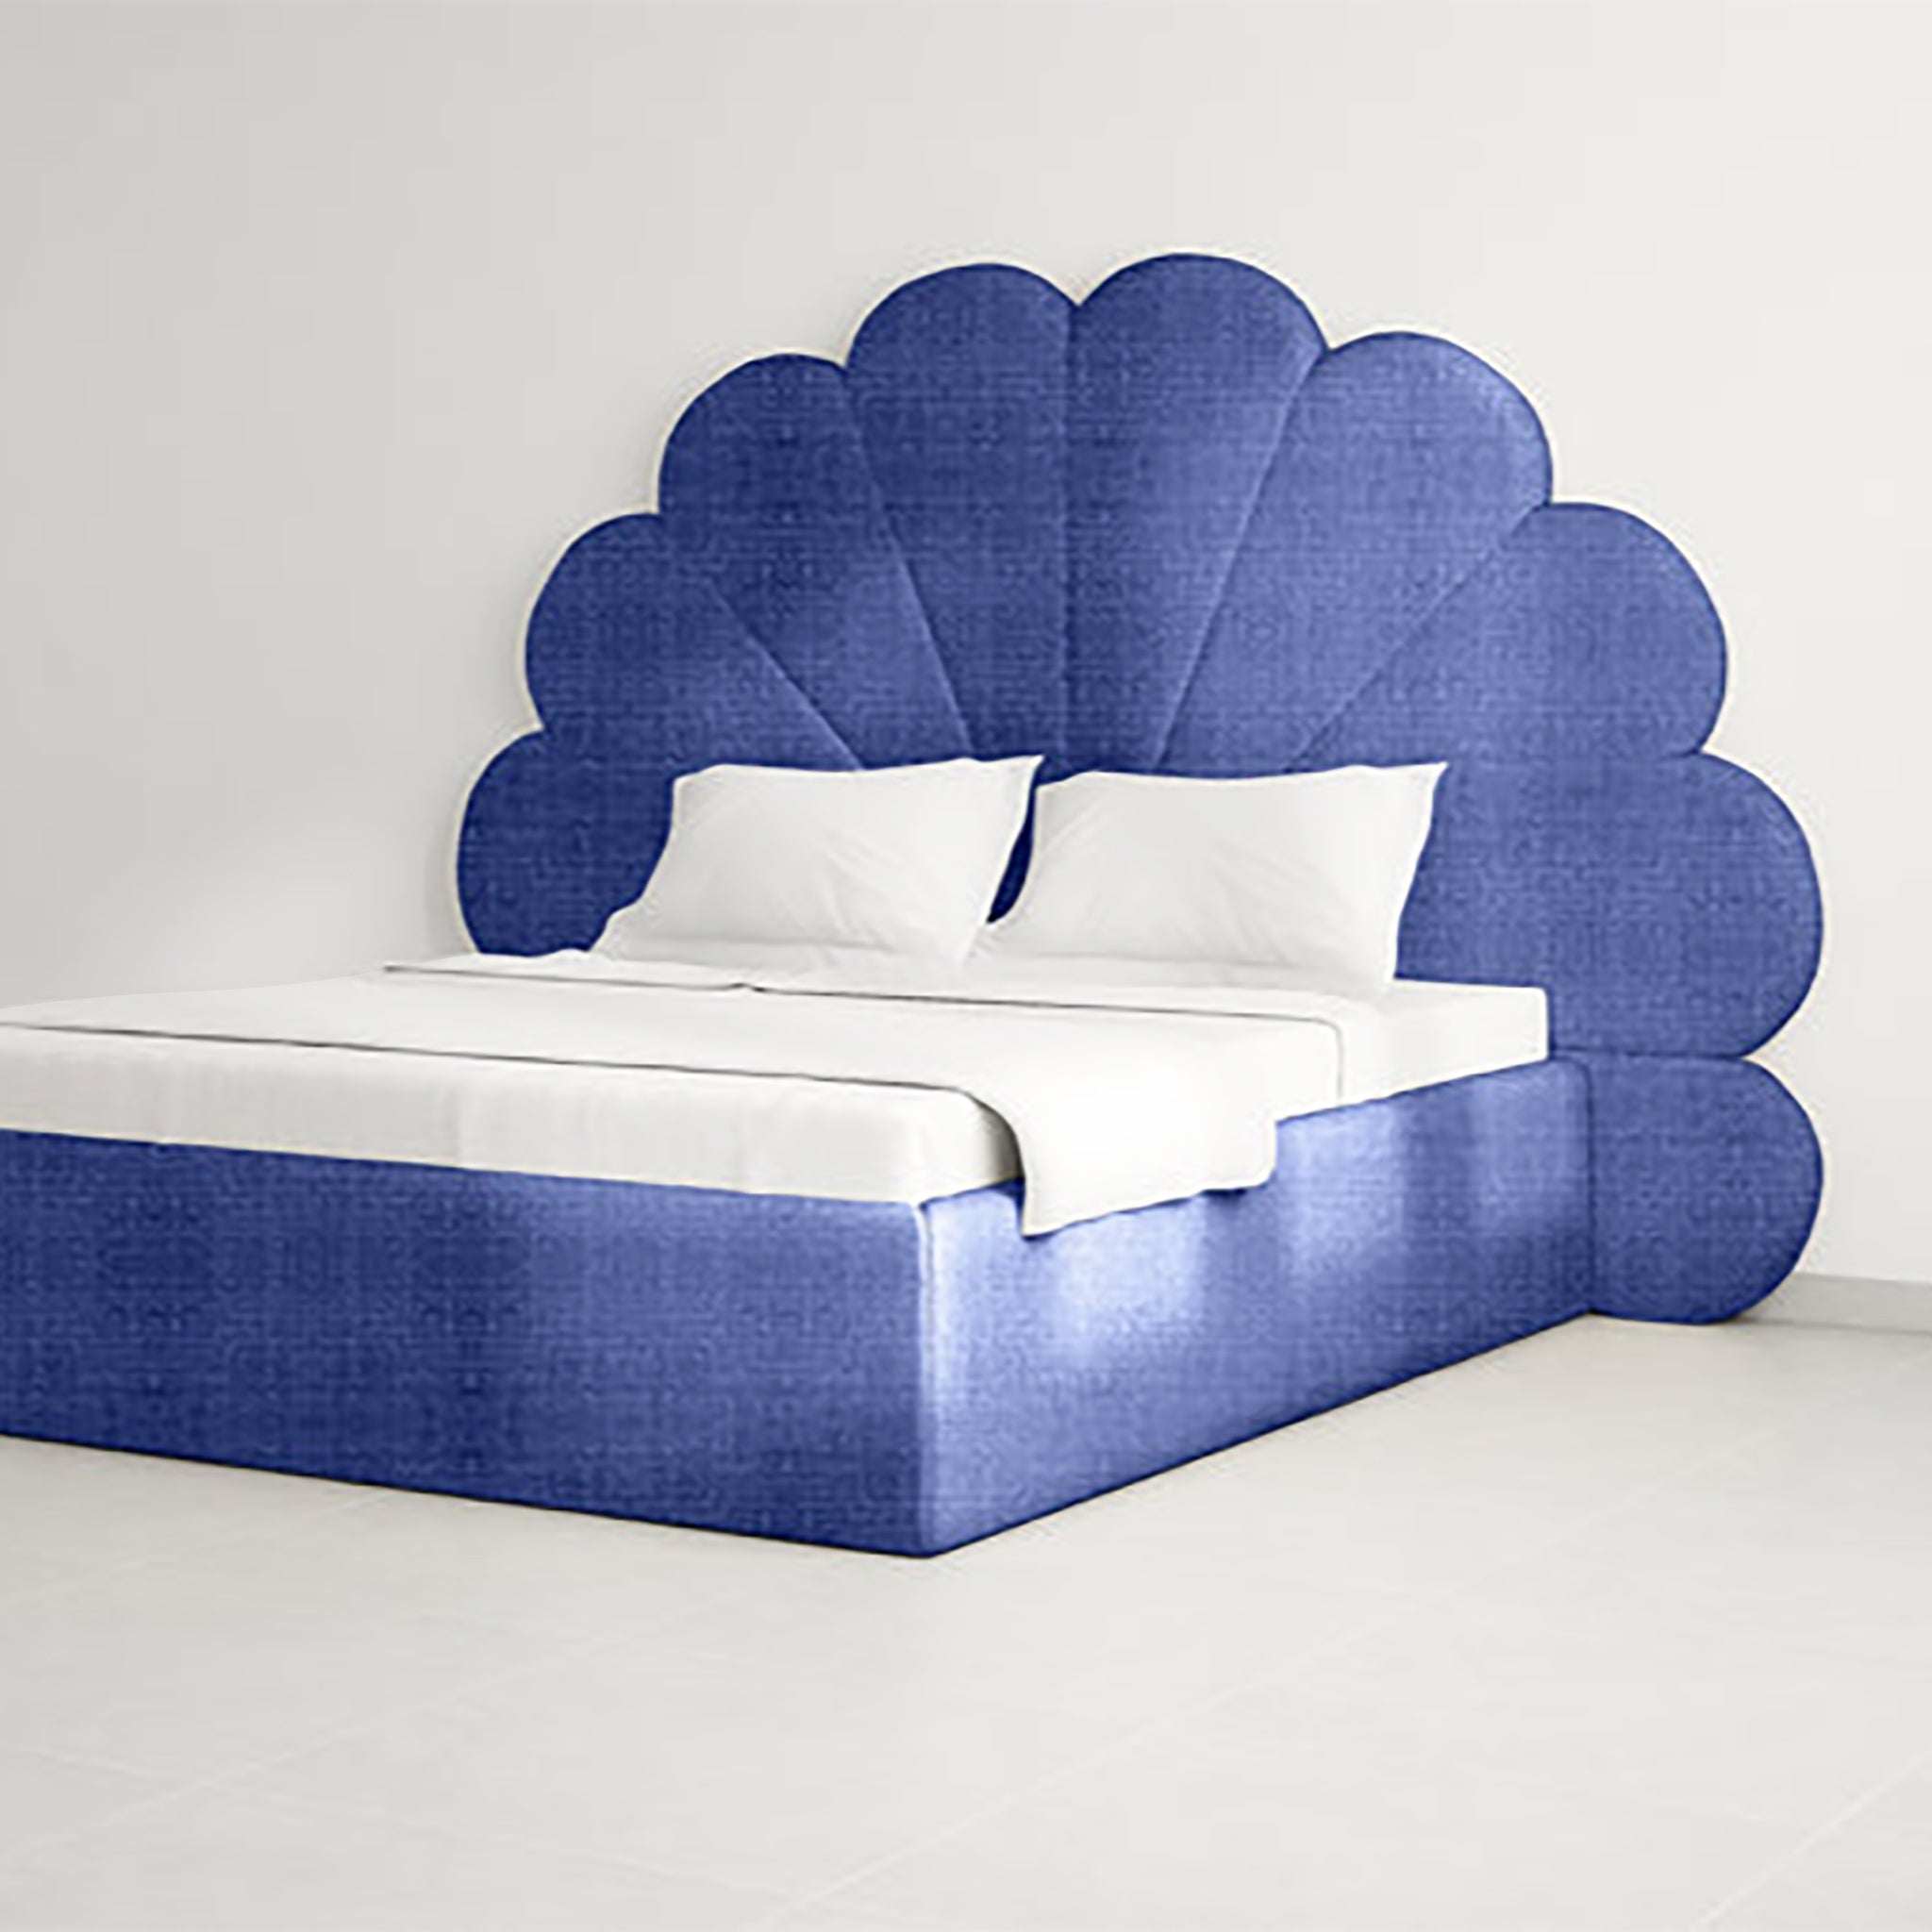 Stylish queen size Kyle Bed with premium upholstery